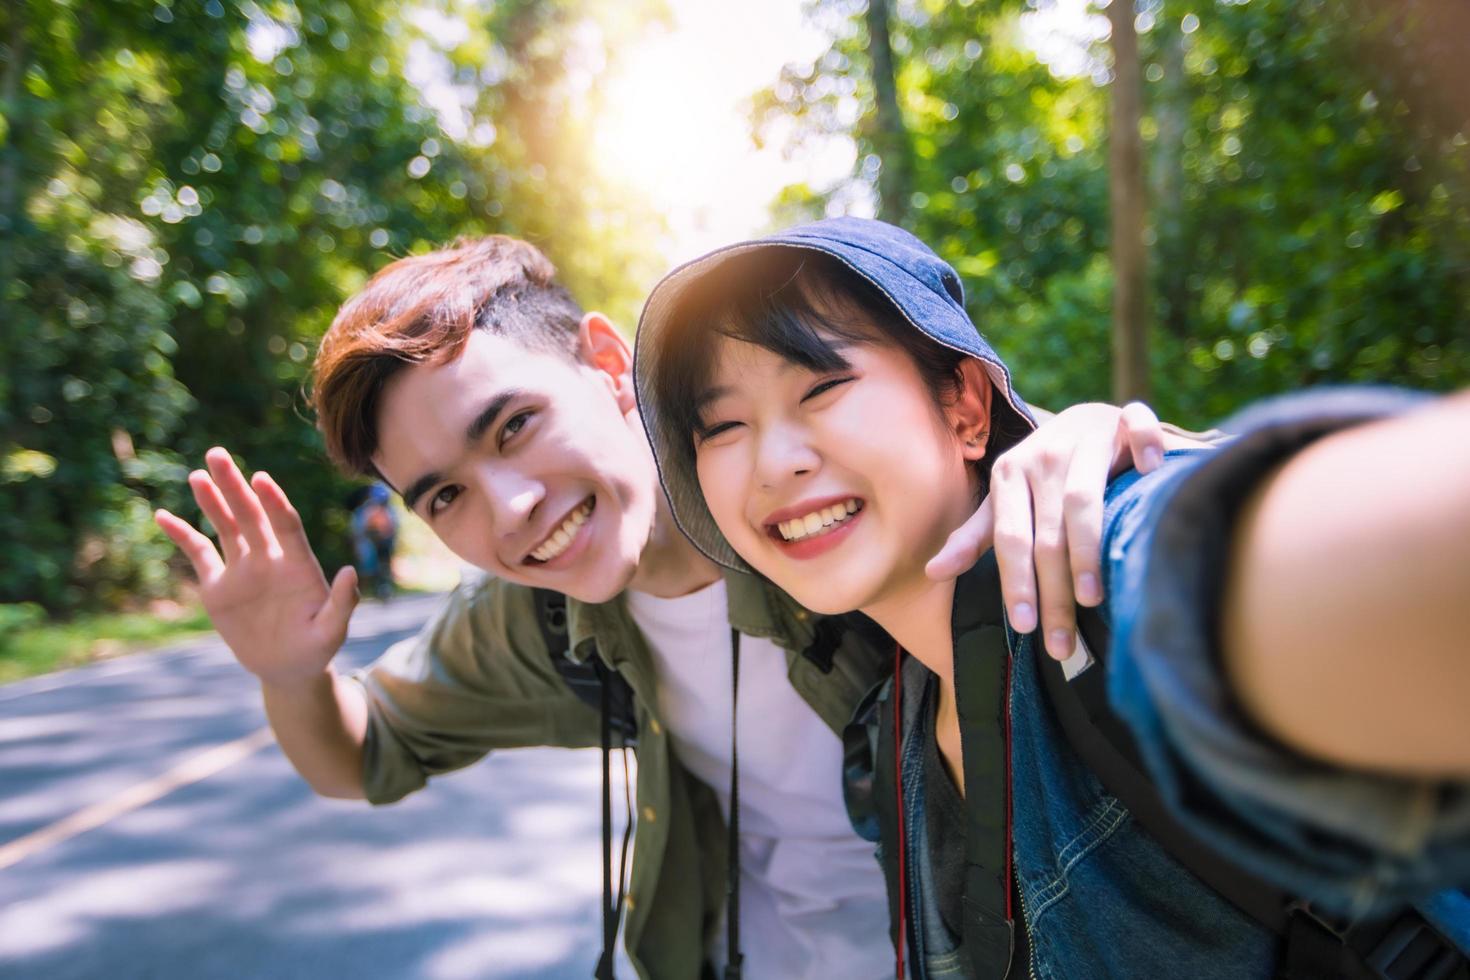 Asian Group of young people with friends and backpacks walking together and happy friends are taking photo and selfie ,Relax time on holiday concept travel